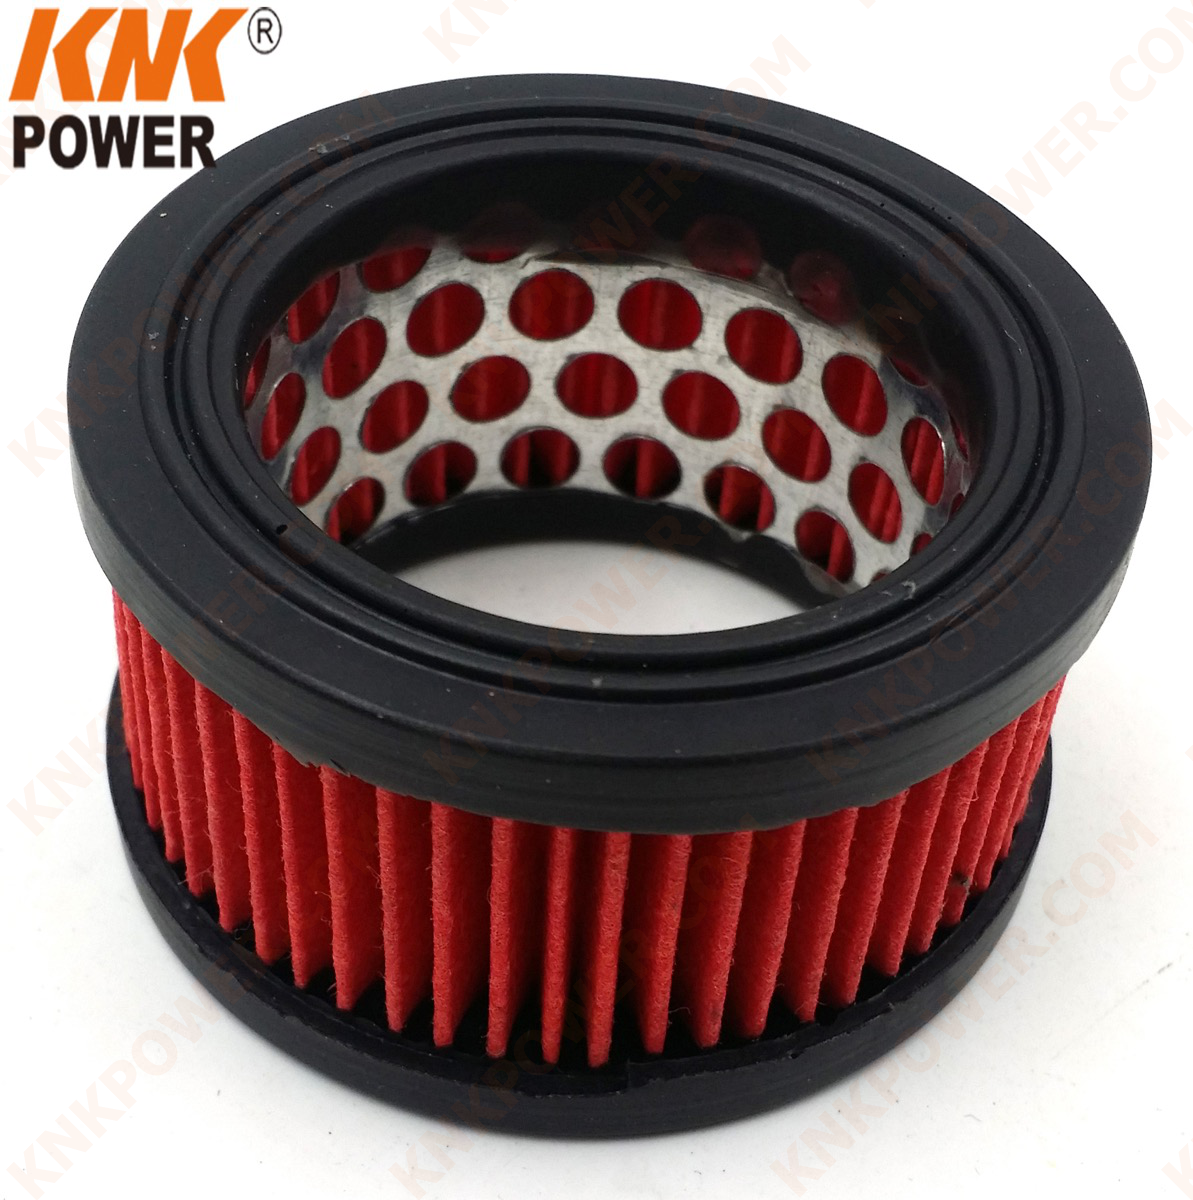 knkpower product image 19038 